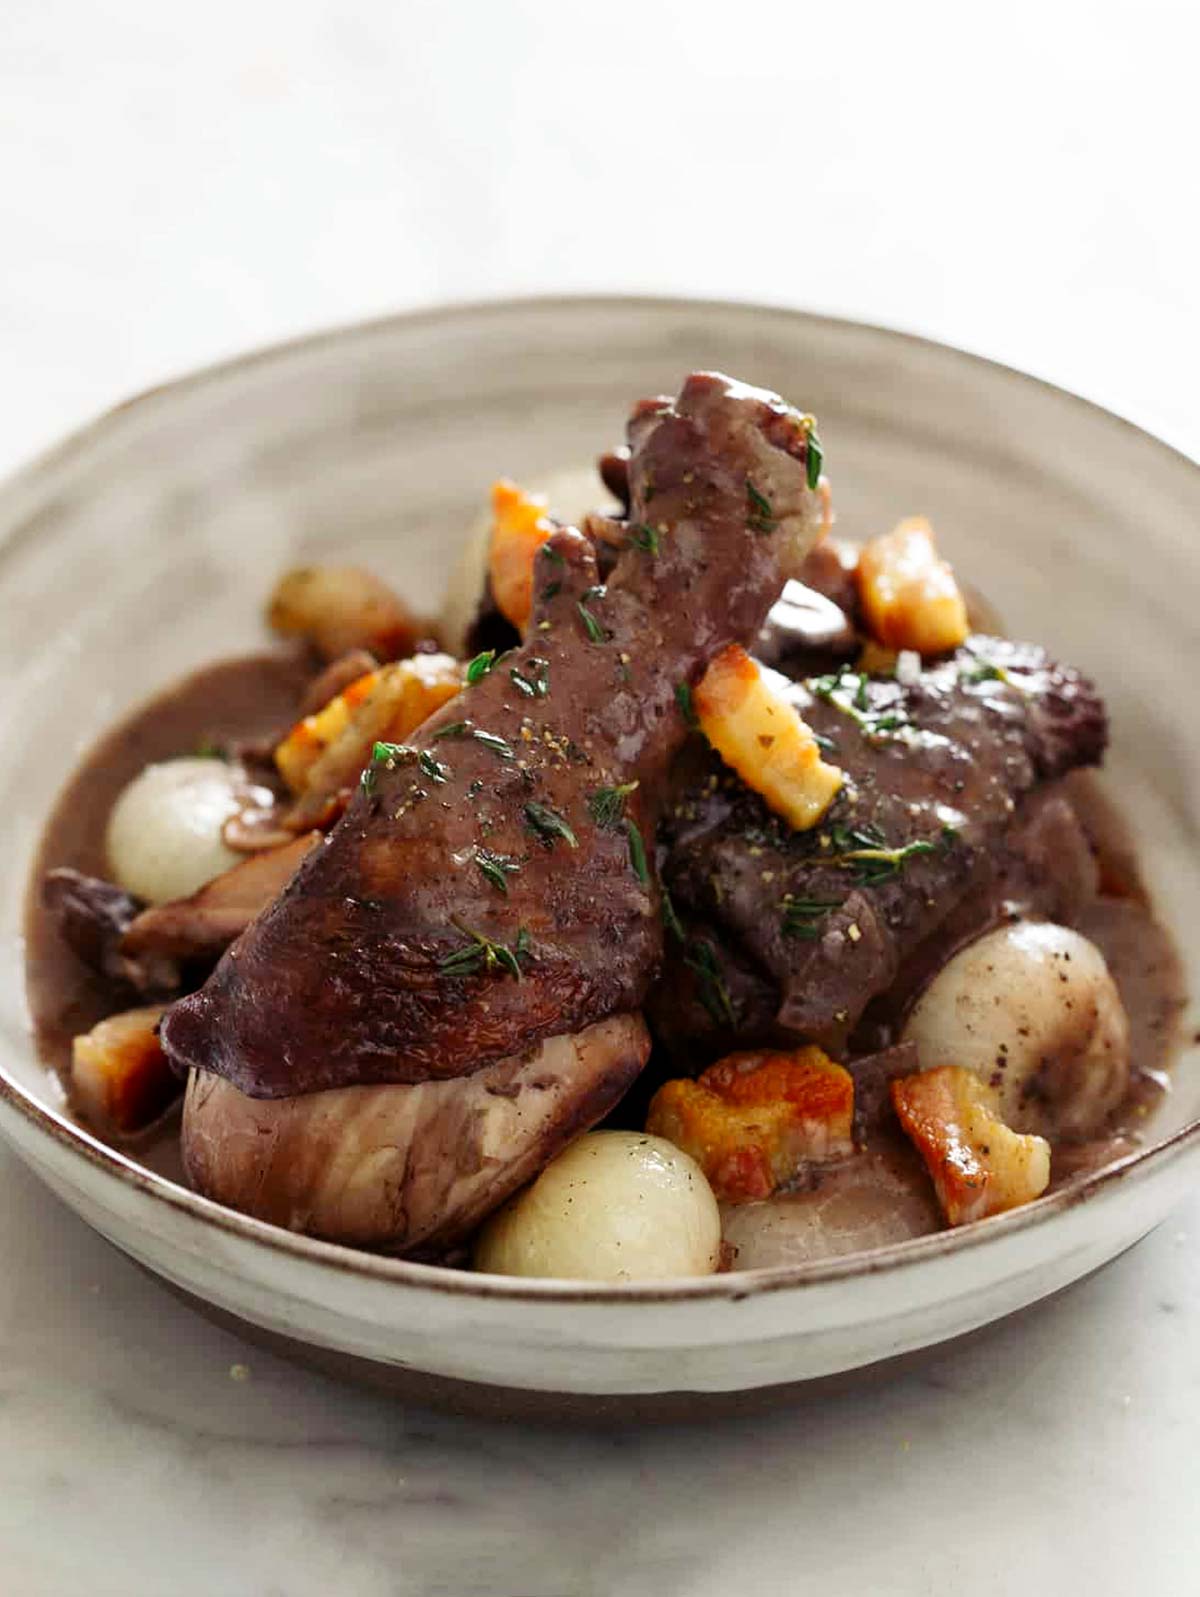 A close up of a Valentine's day dinner  idea:  bowl of coq au vin with bread, a fork, and a knife.